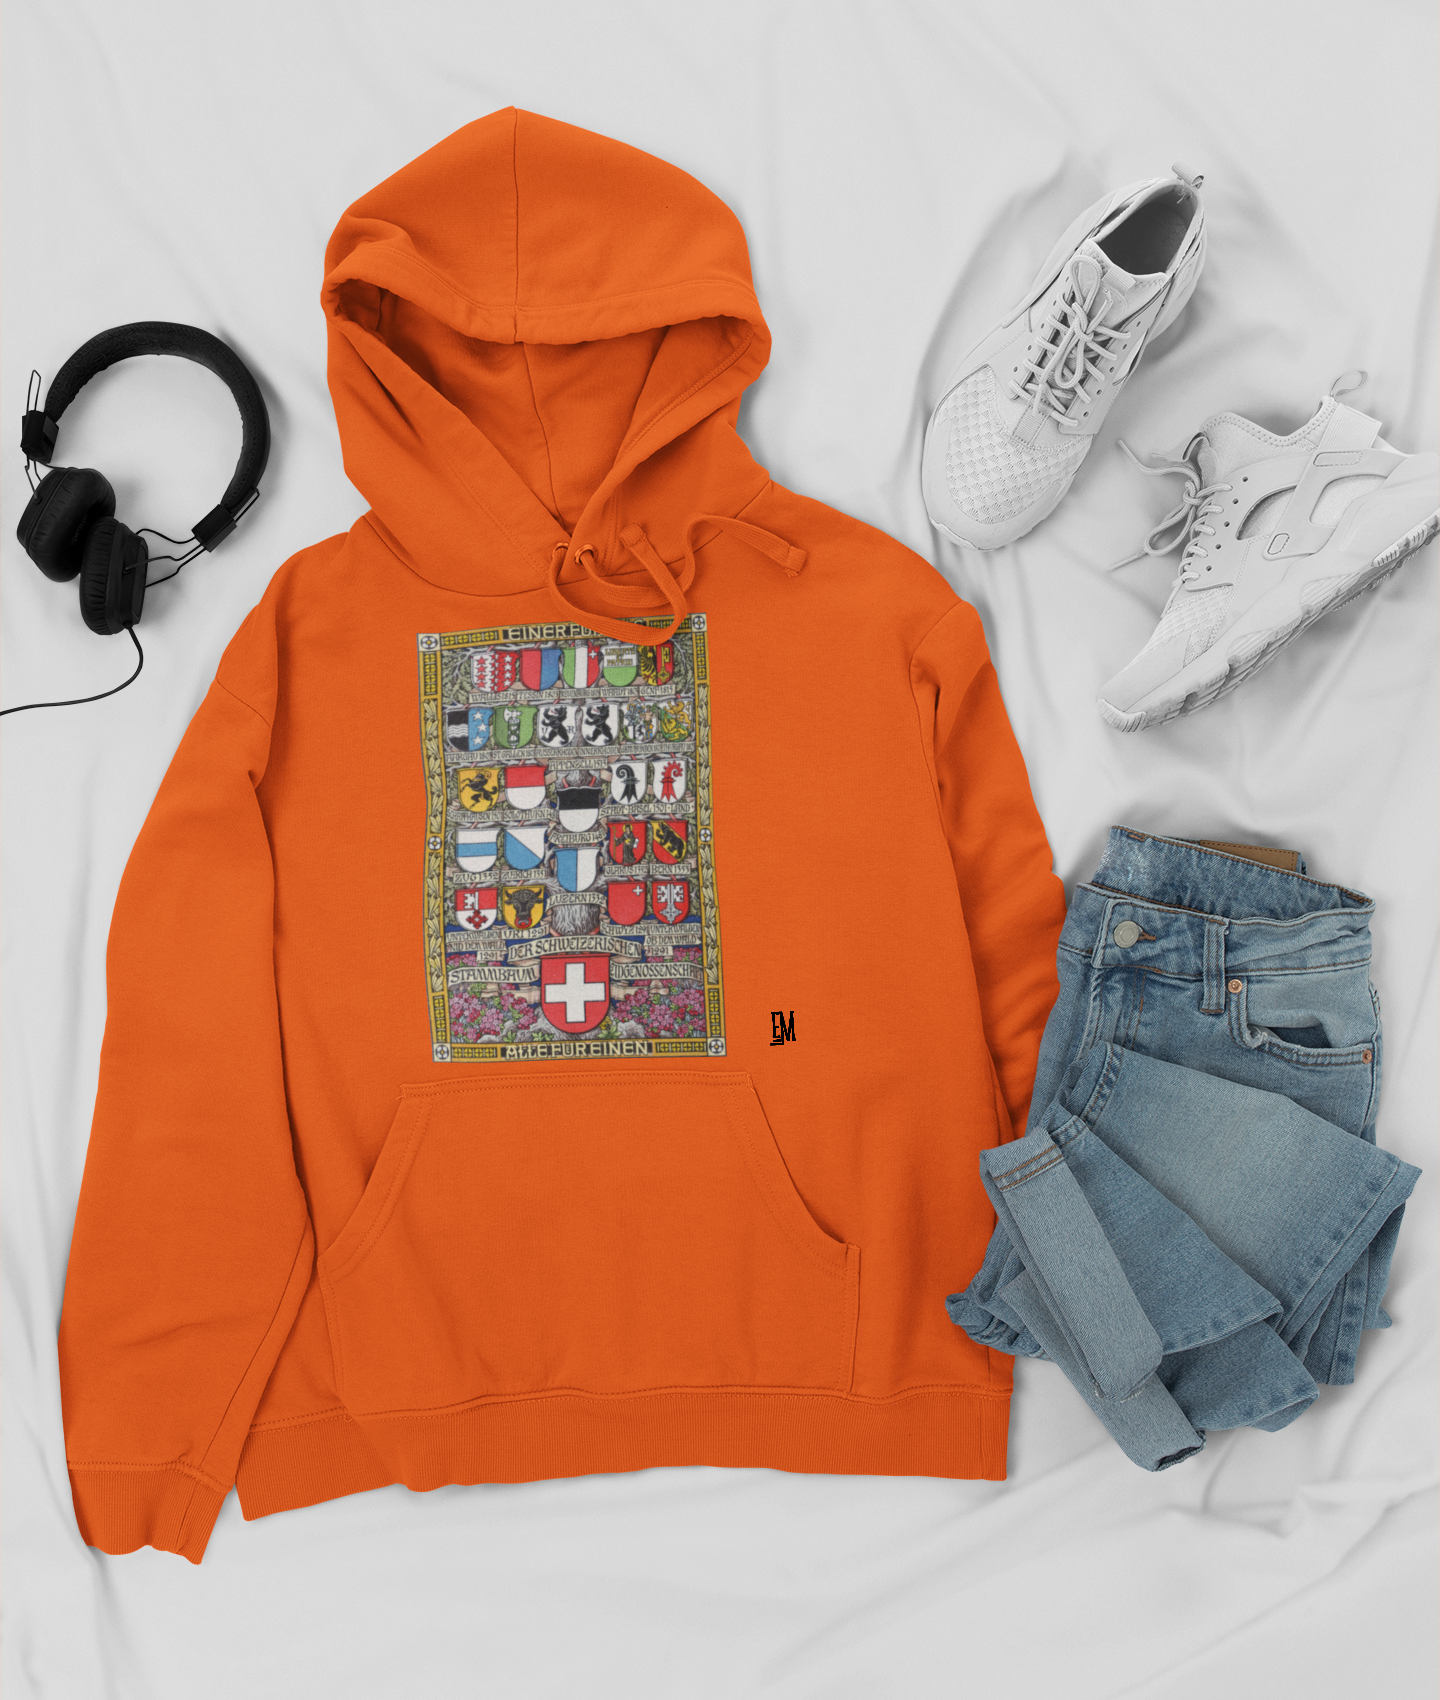 outfit-mockup-featuring-a-pullover-hoodie-next-to-trendy-sneakers-and-jeans-26334-3.png